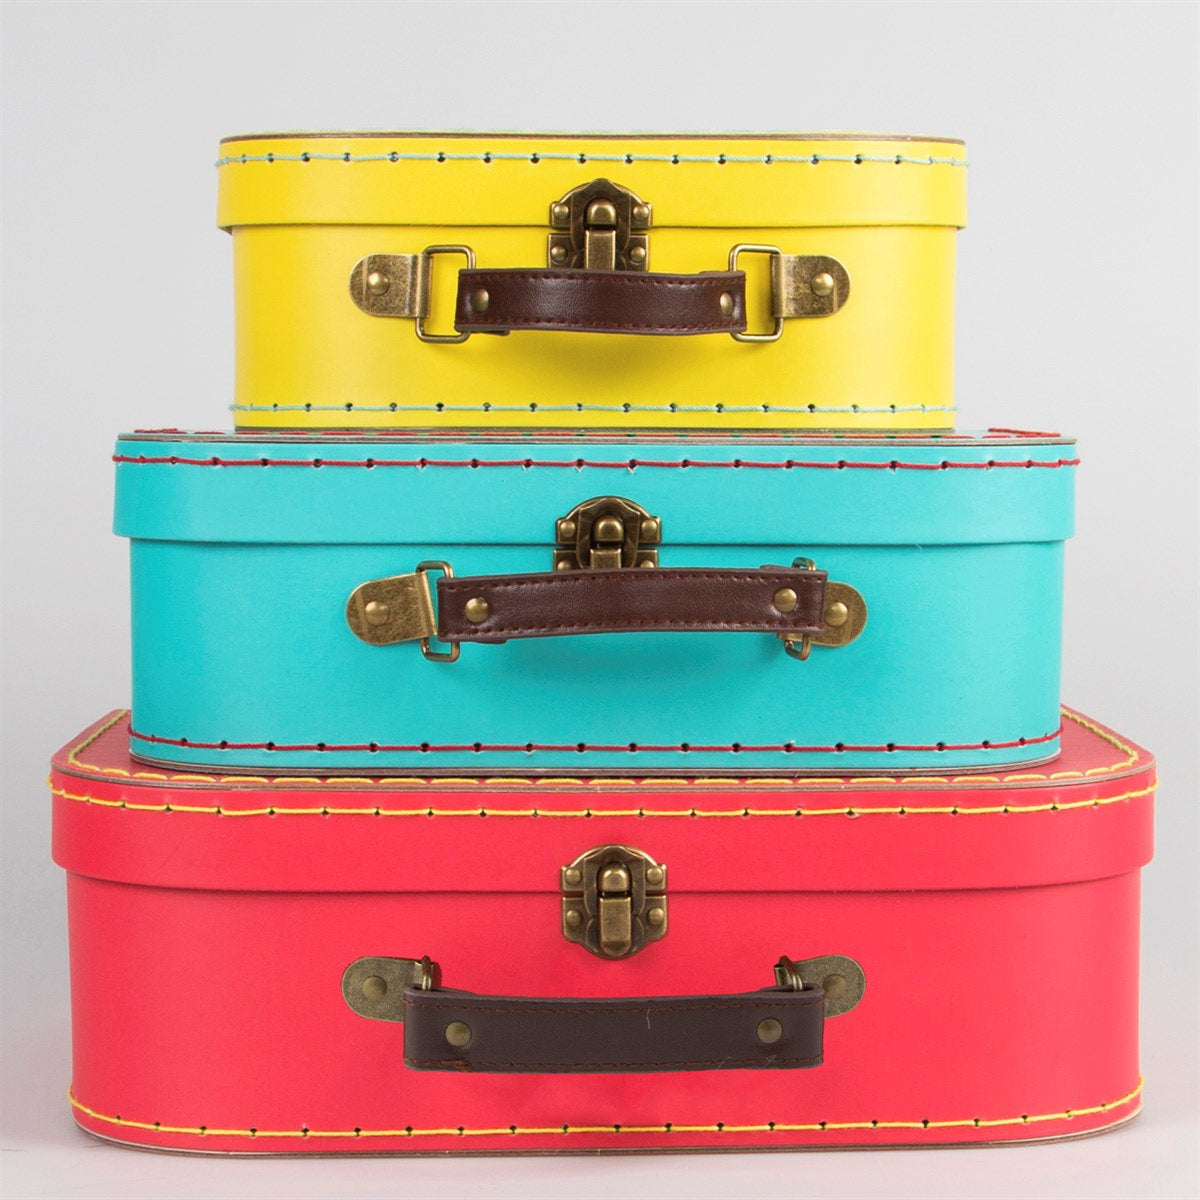 Vibrant Red, Blue, and Yellow Suitcase Style Gift Box Arts and Crafts toys wedding birthday